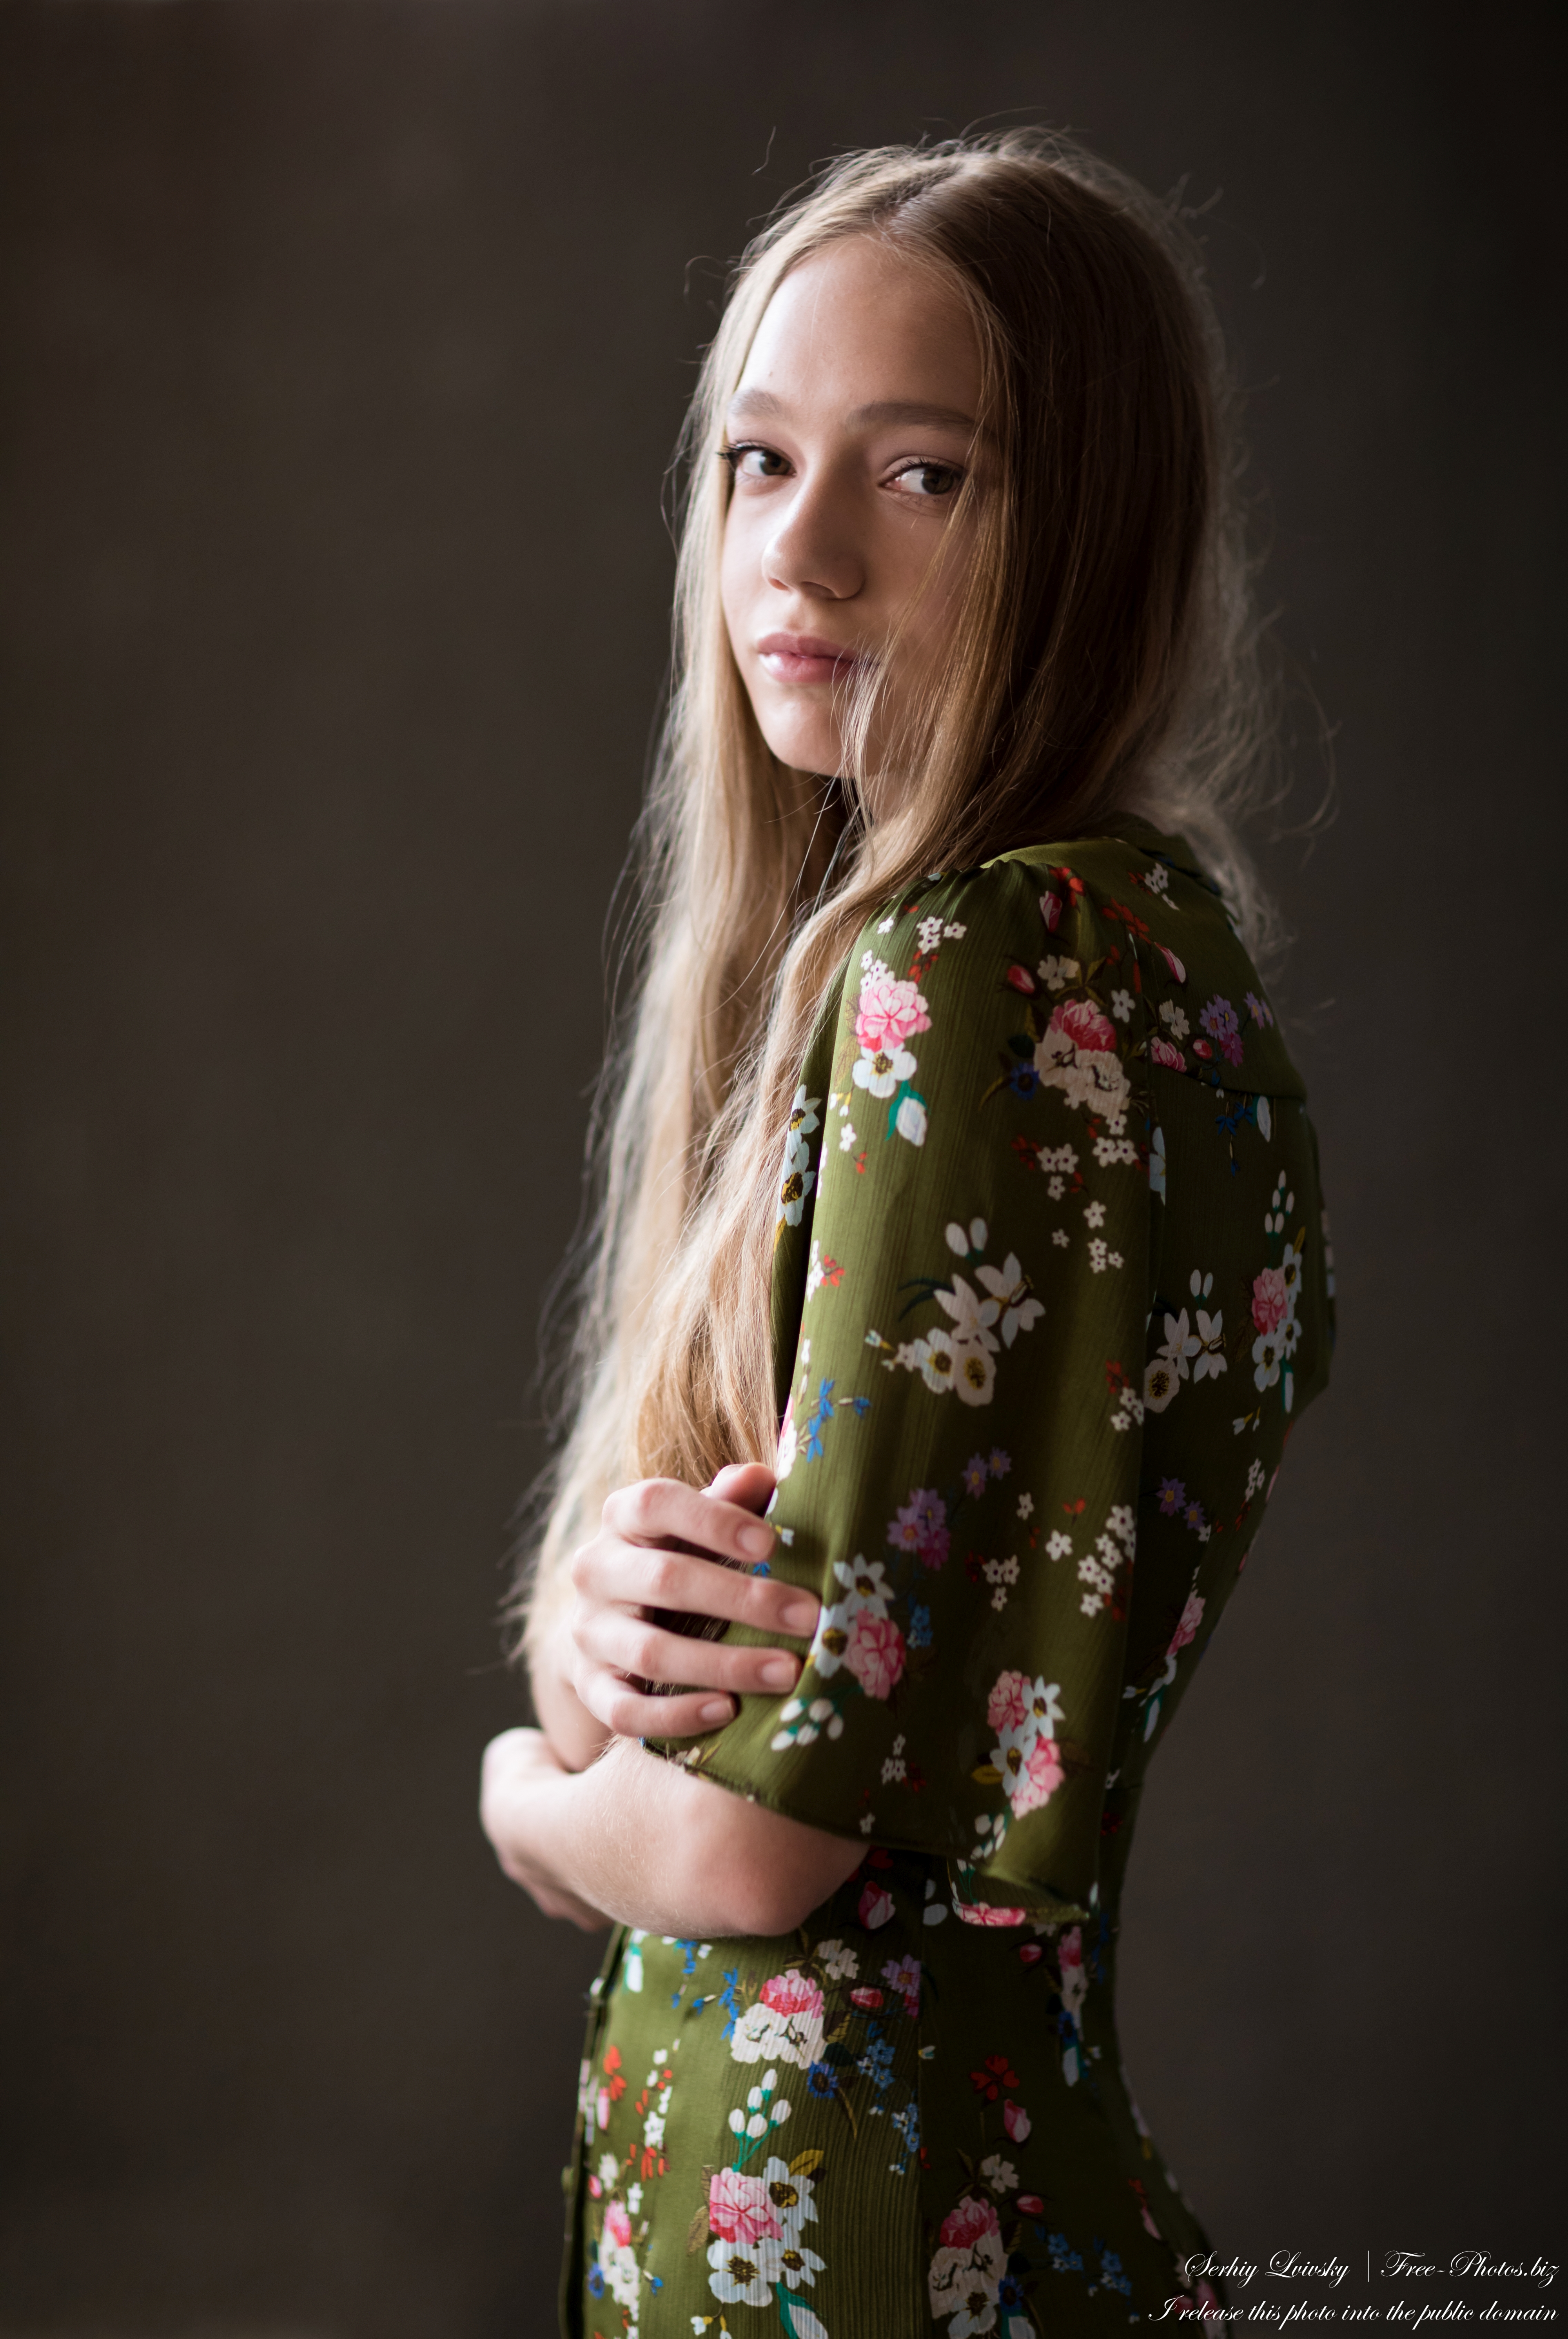 marta_a_16-year-old_natural_blonde_girl_photographed_by_serhiy_lvivsky_in_july_2020_02